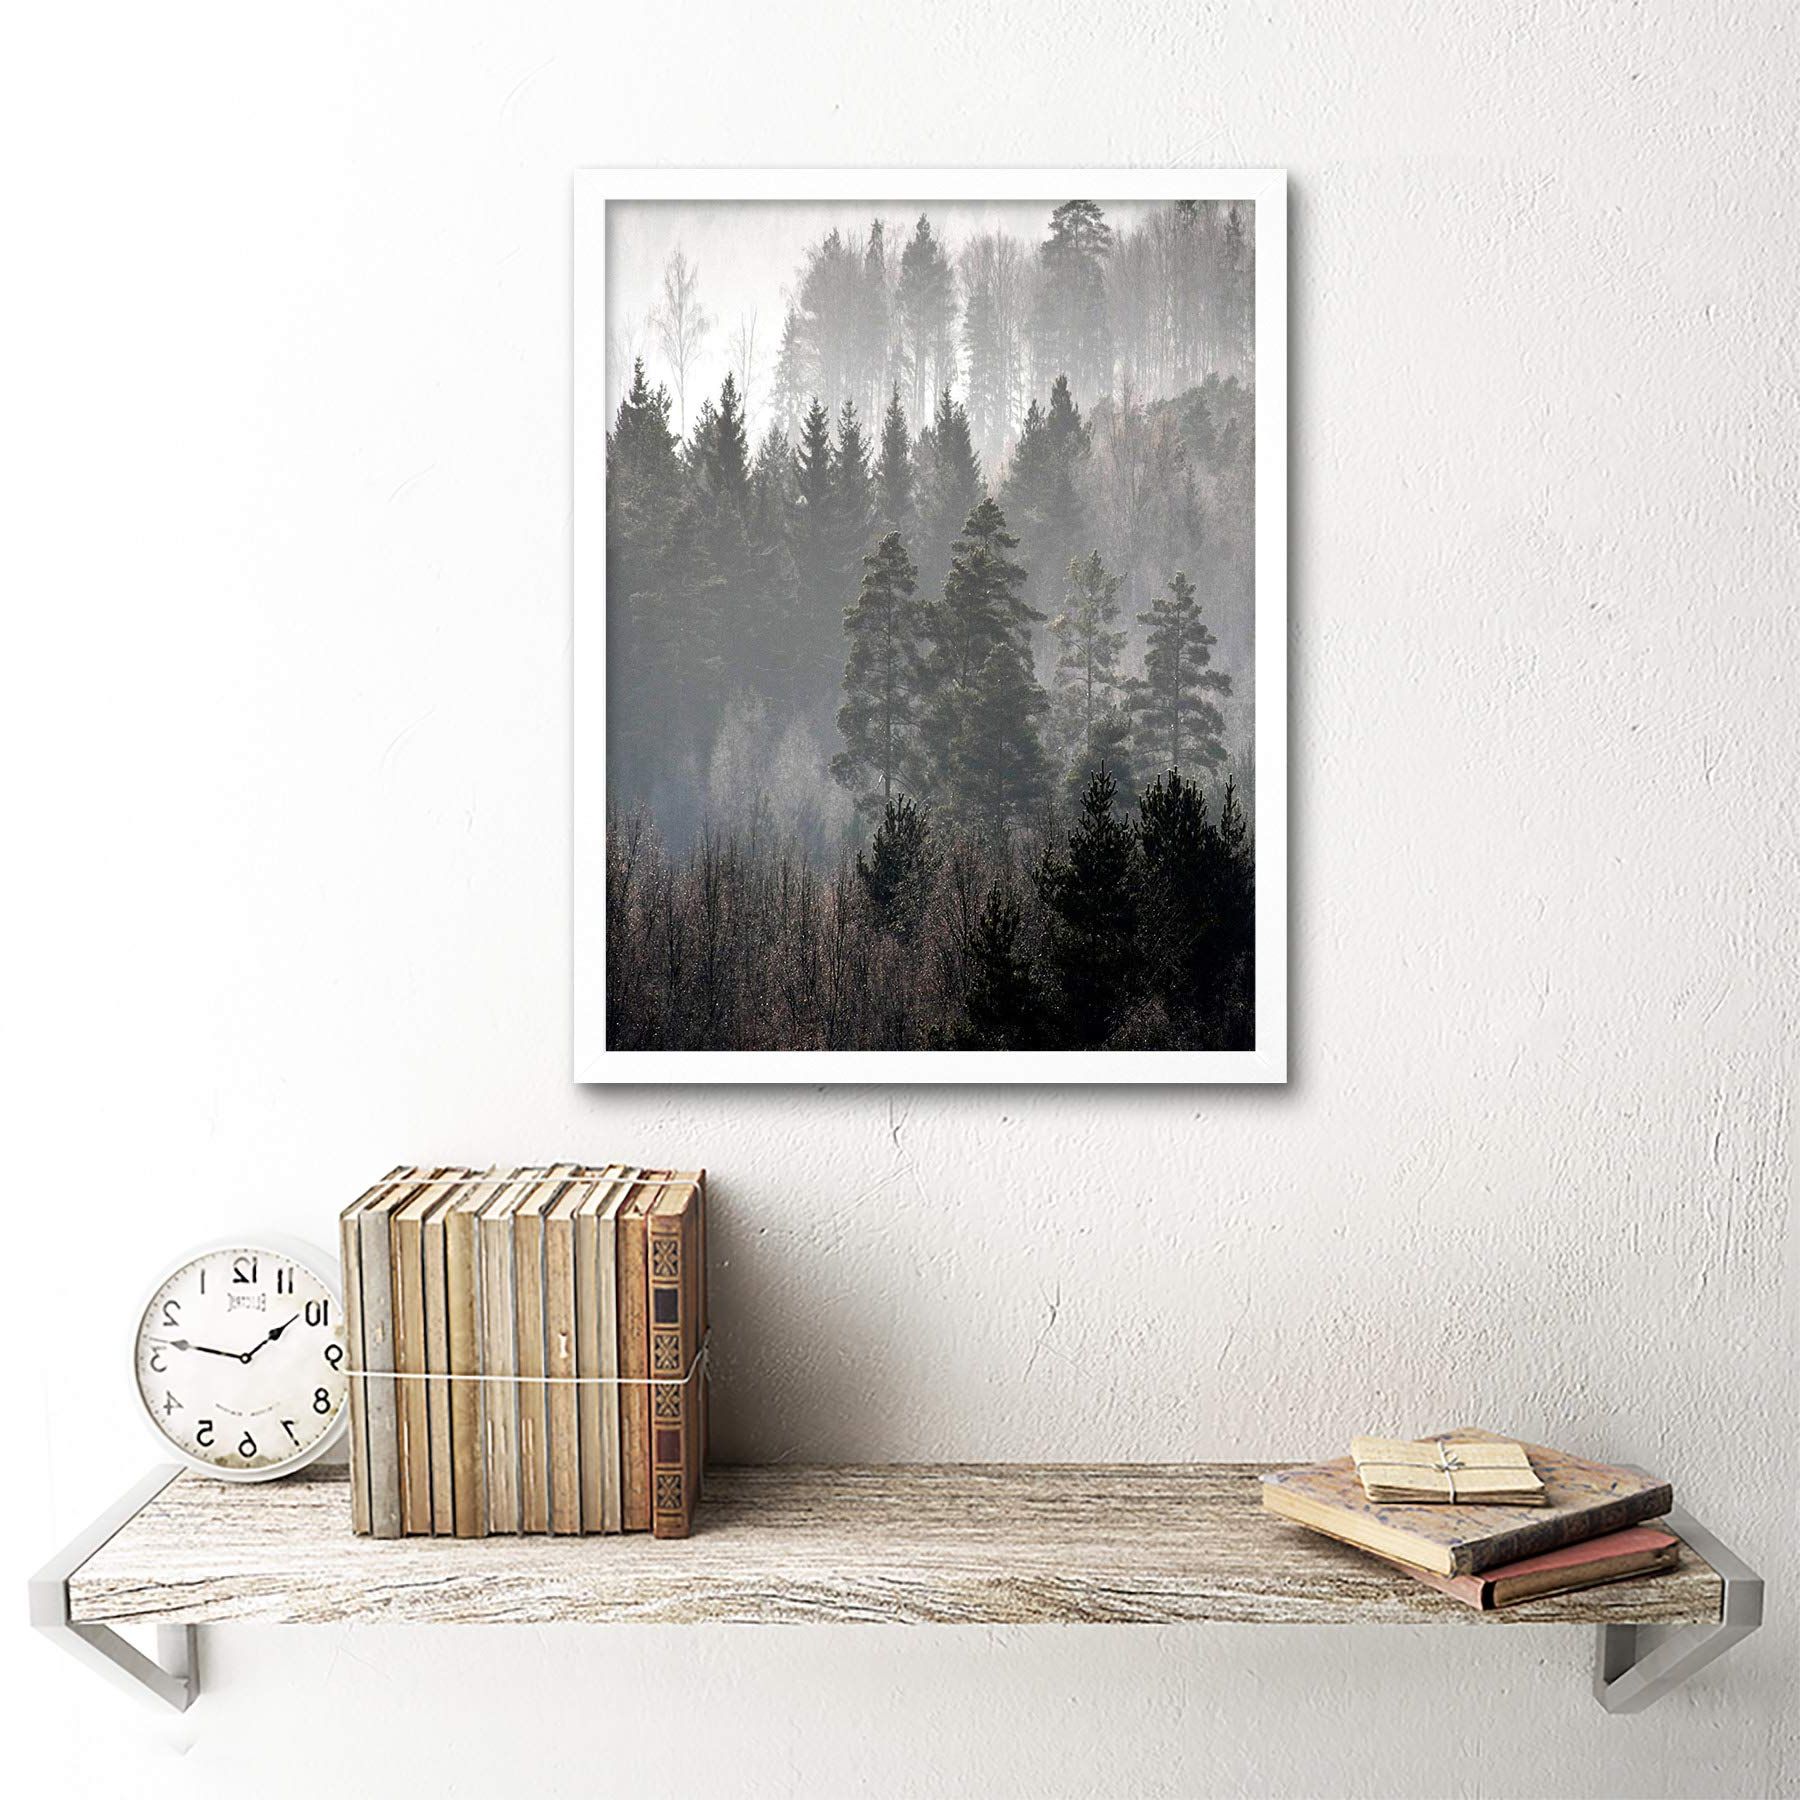 Well Liked Amazon: Photo Landscape Forest Misty Pines Woods Trees Fog Art Print  Framed Poster Wall Decor 12x16 Inch : Sports & Outdoors For Misty Pines Wall Art (View 2 of 15)